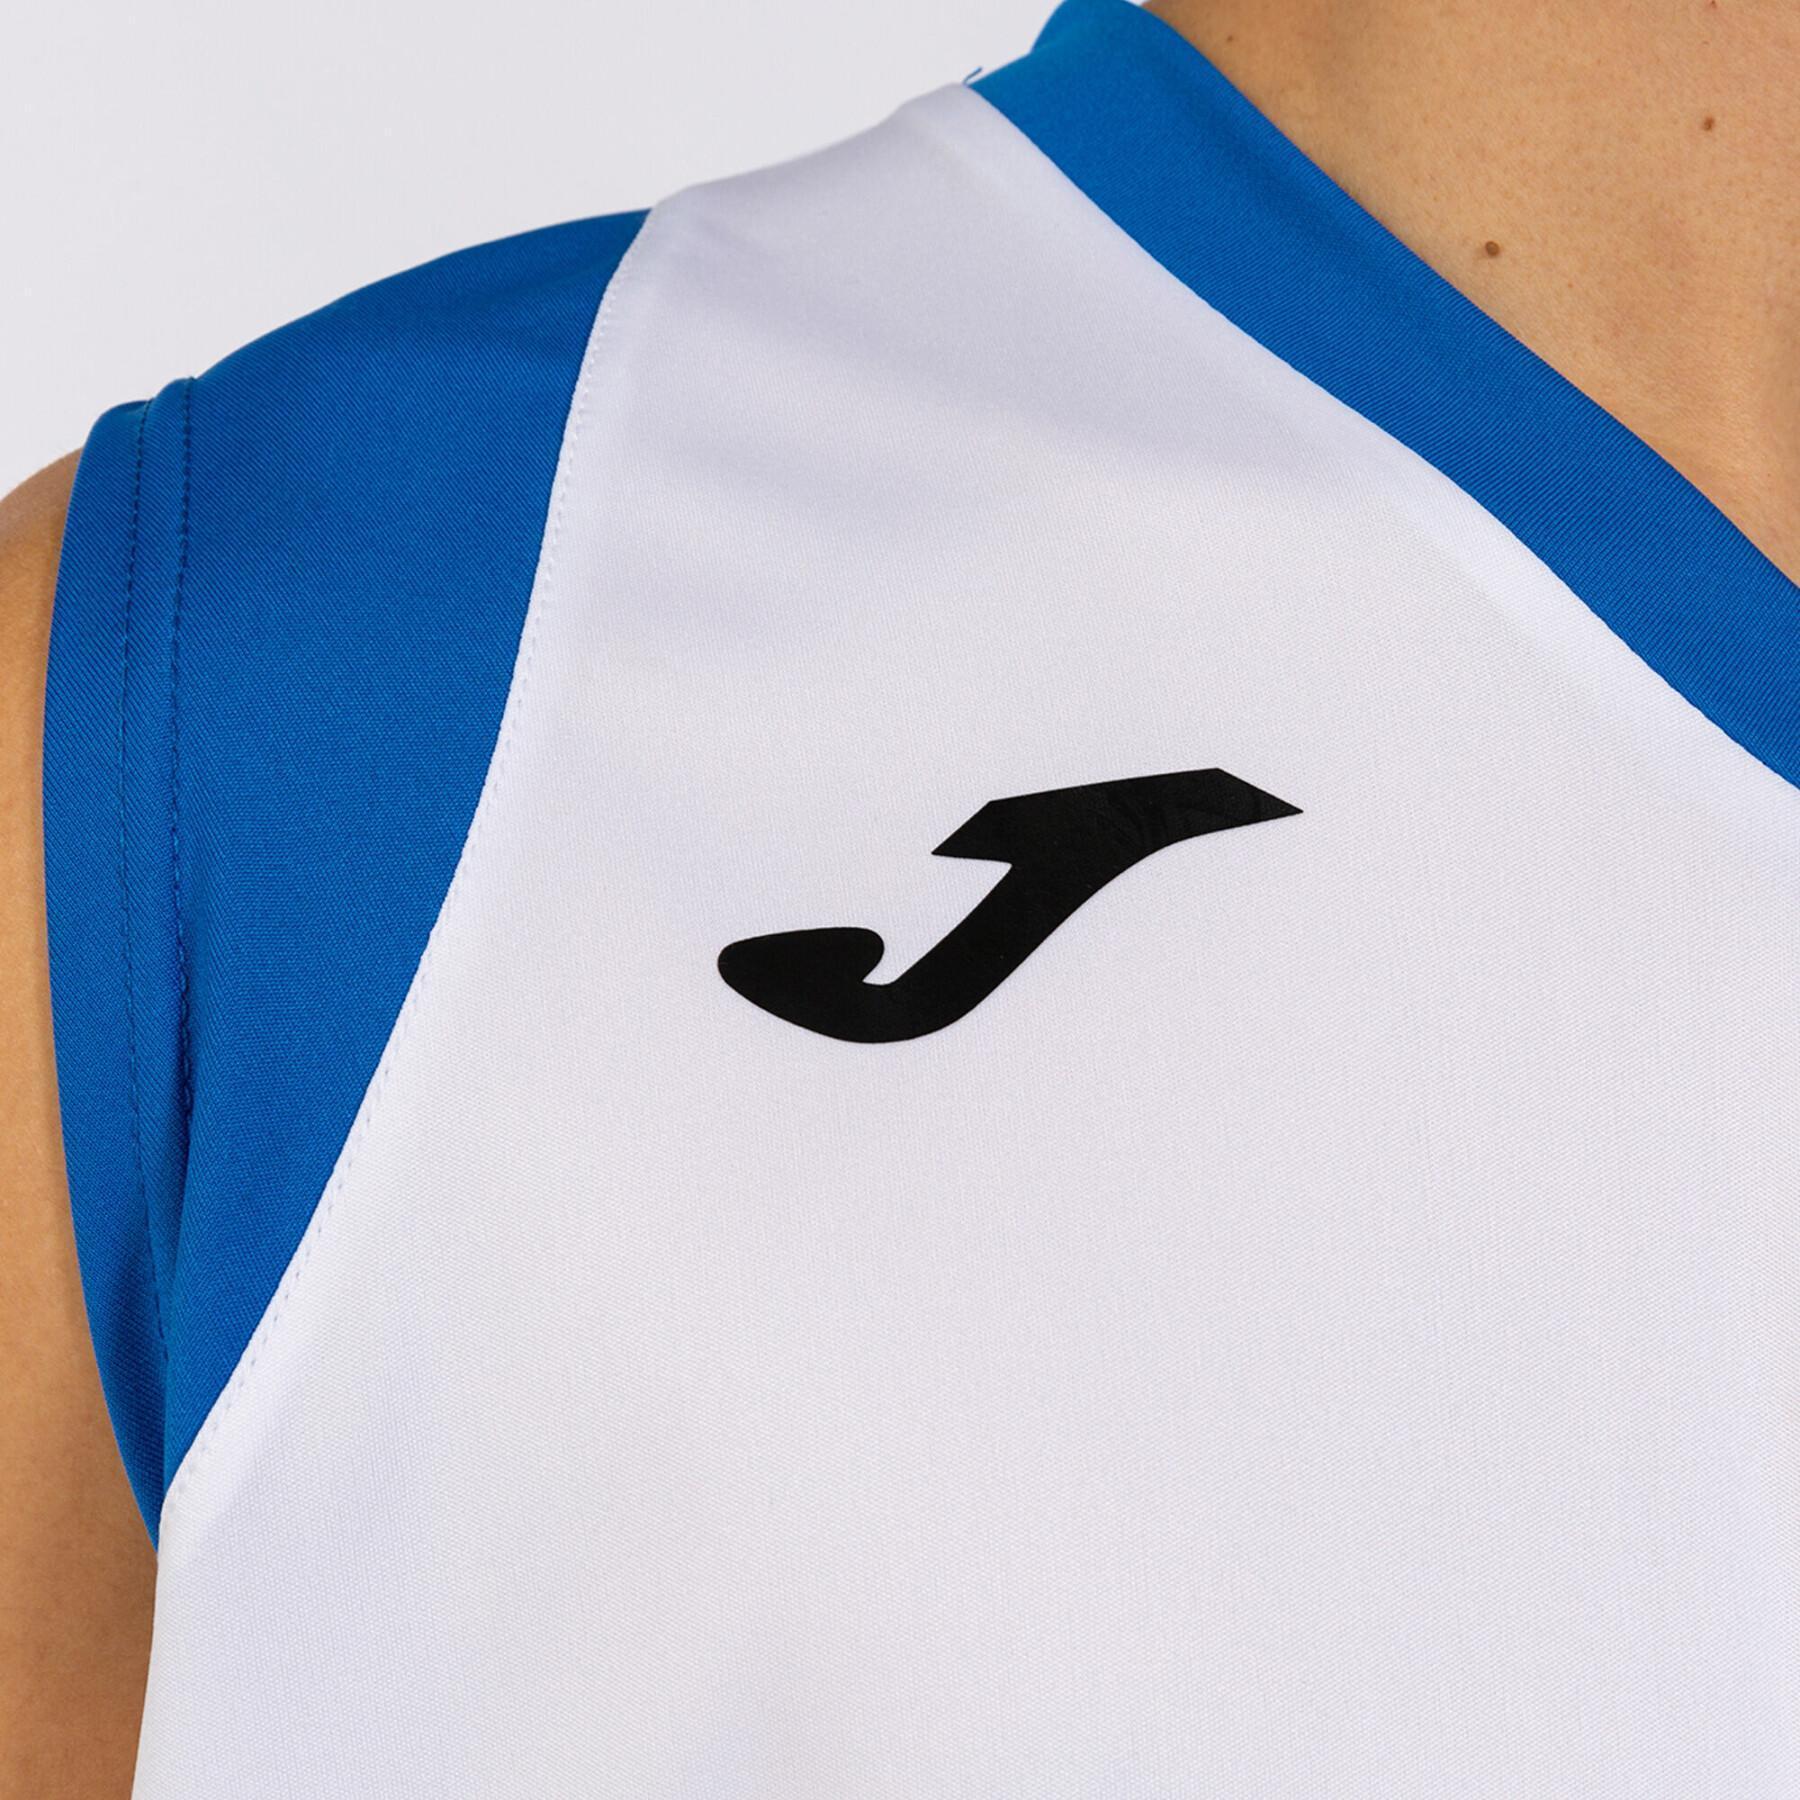 Children's jersey and shorts set Joma Final II